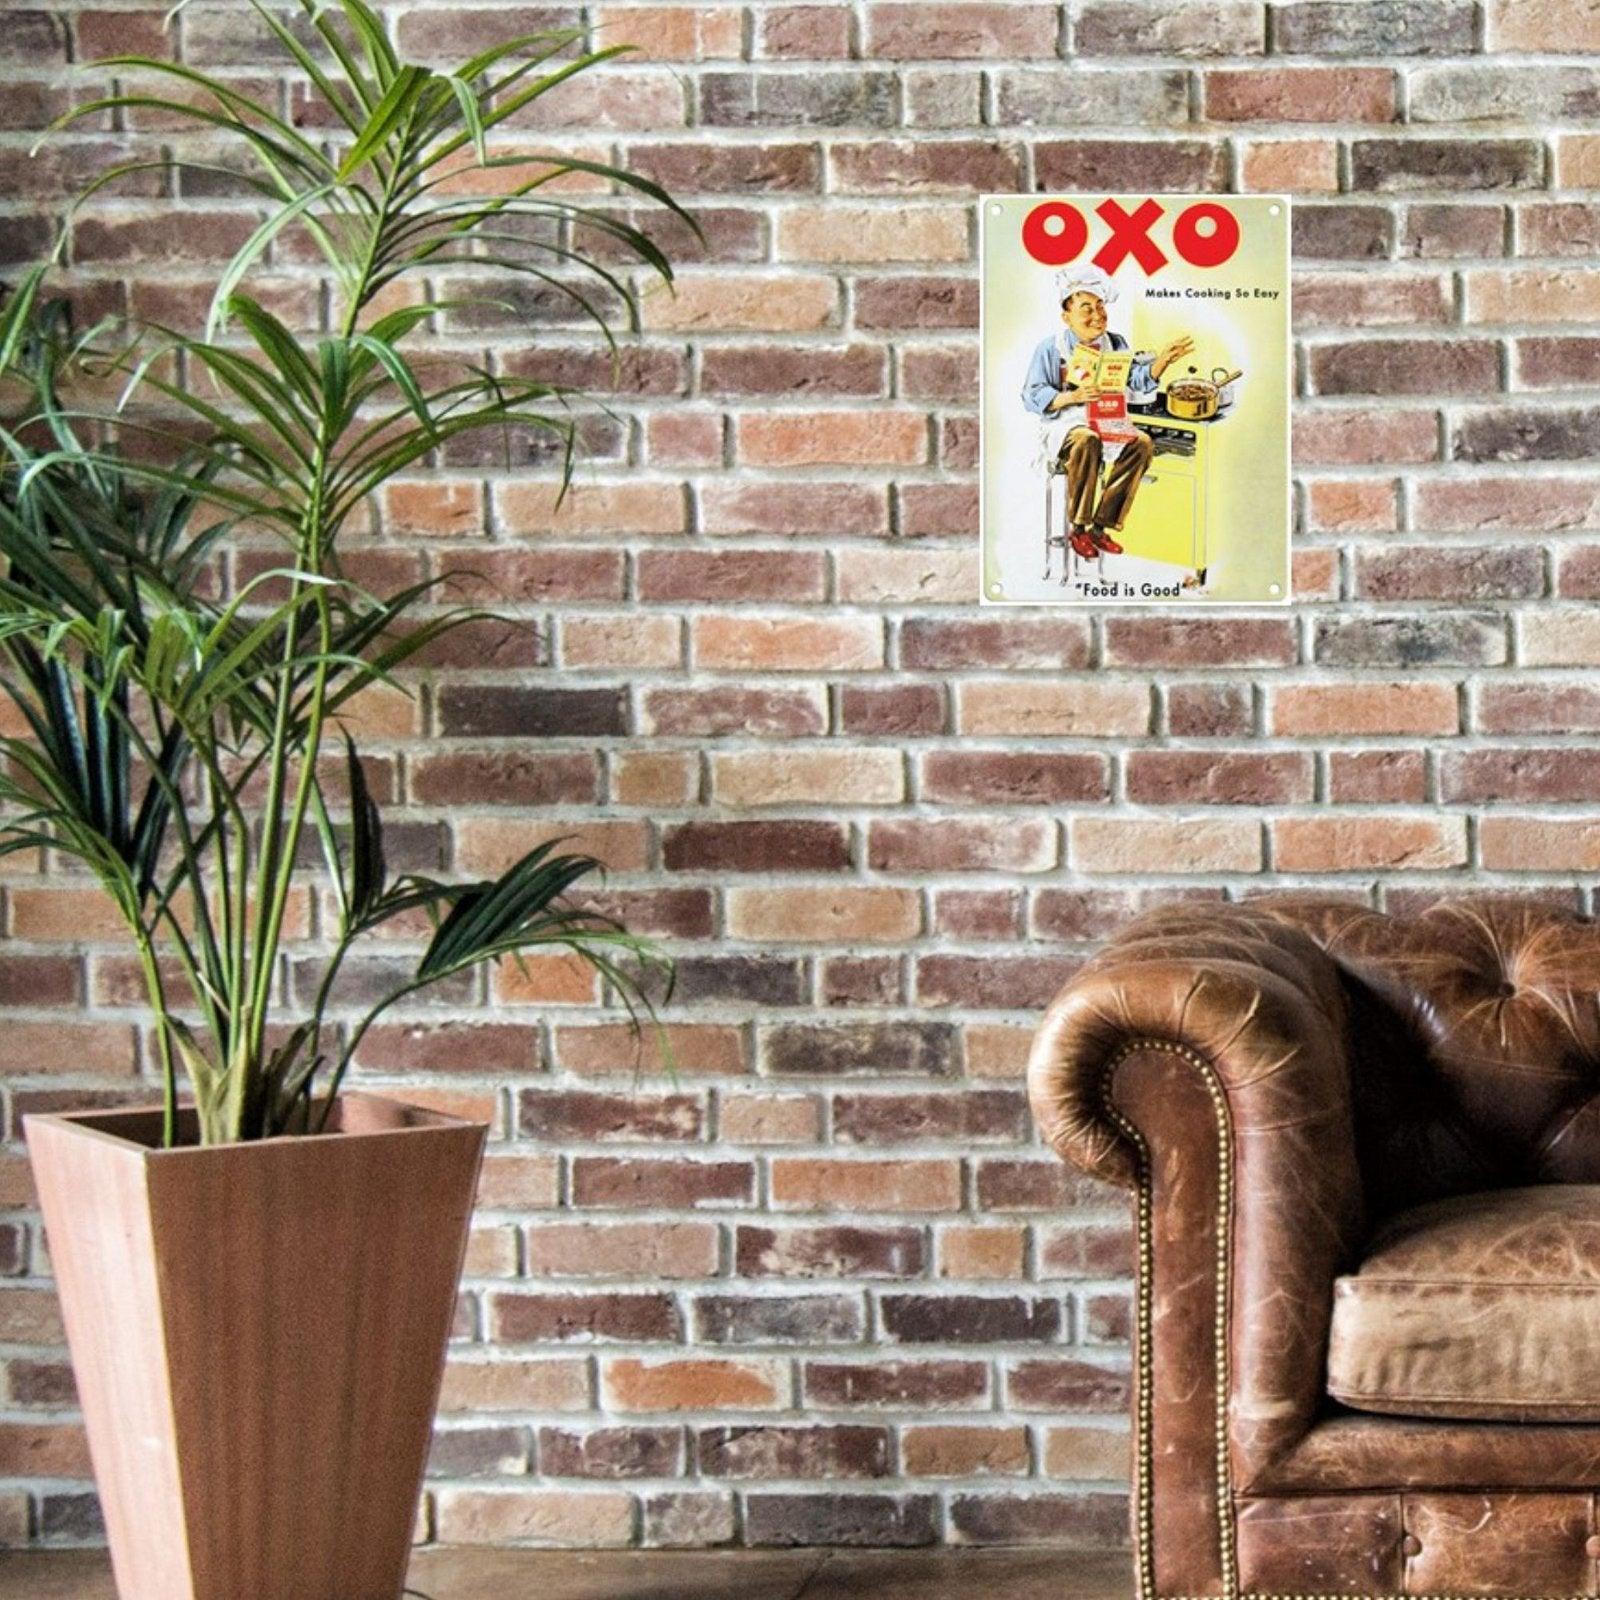 View Small Metal Sign 45 x 375cm Vintage Retro Oxo information